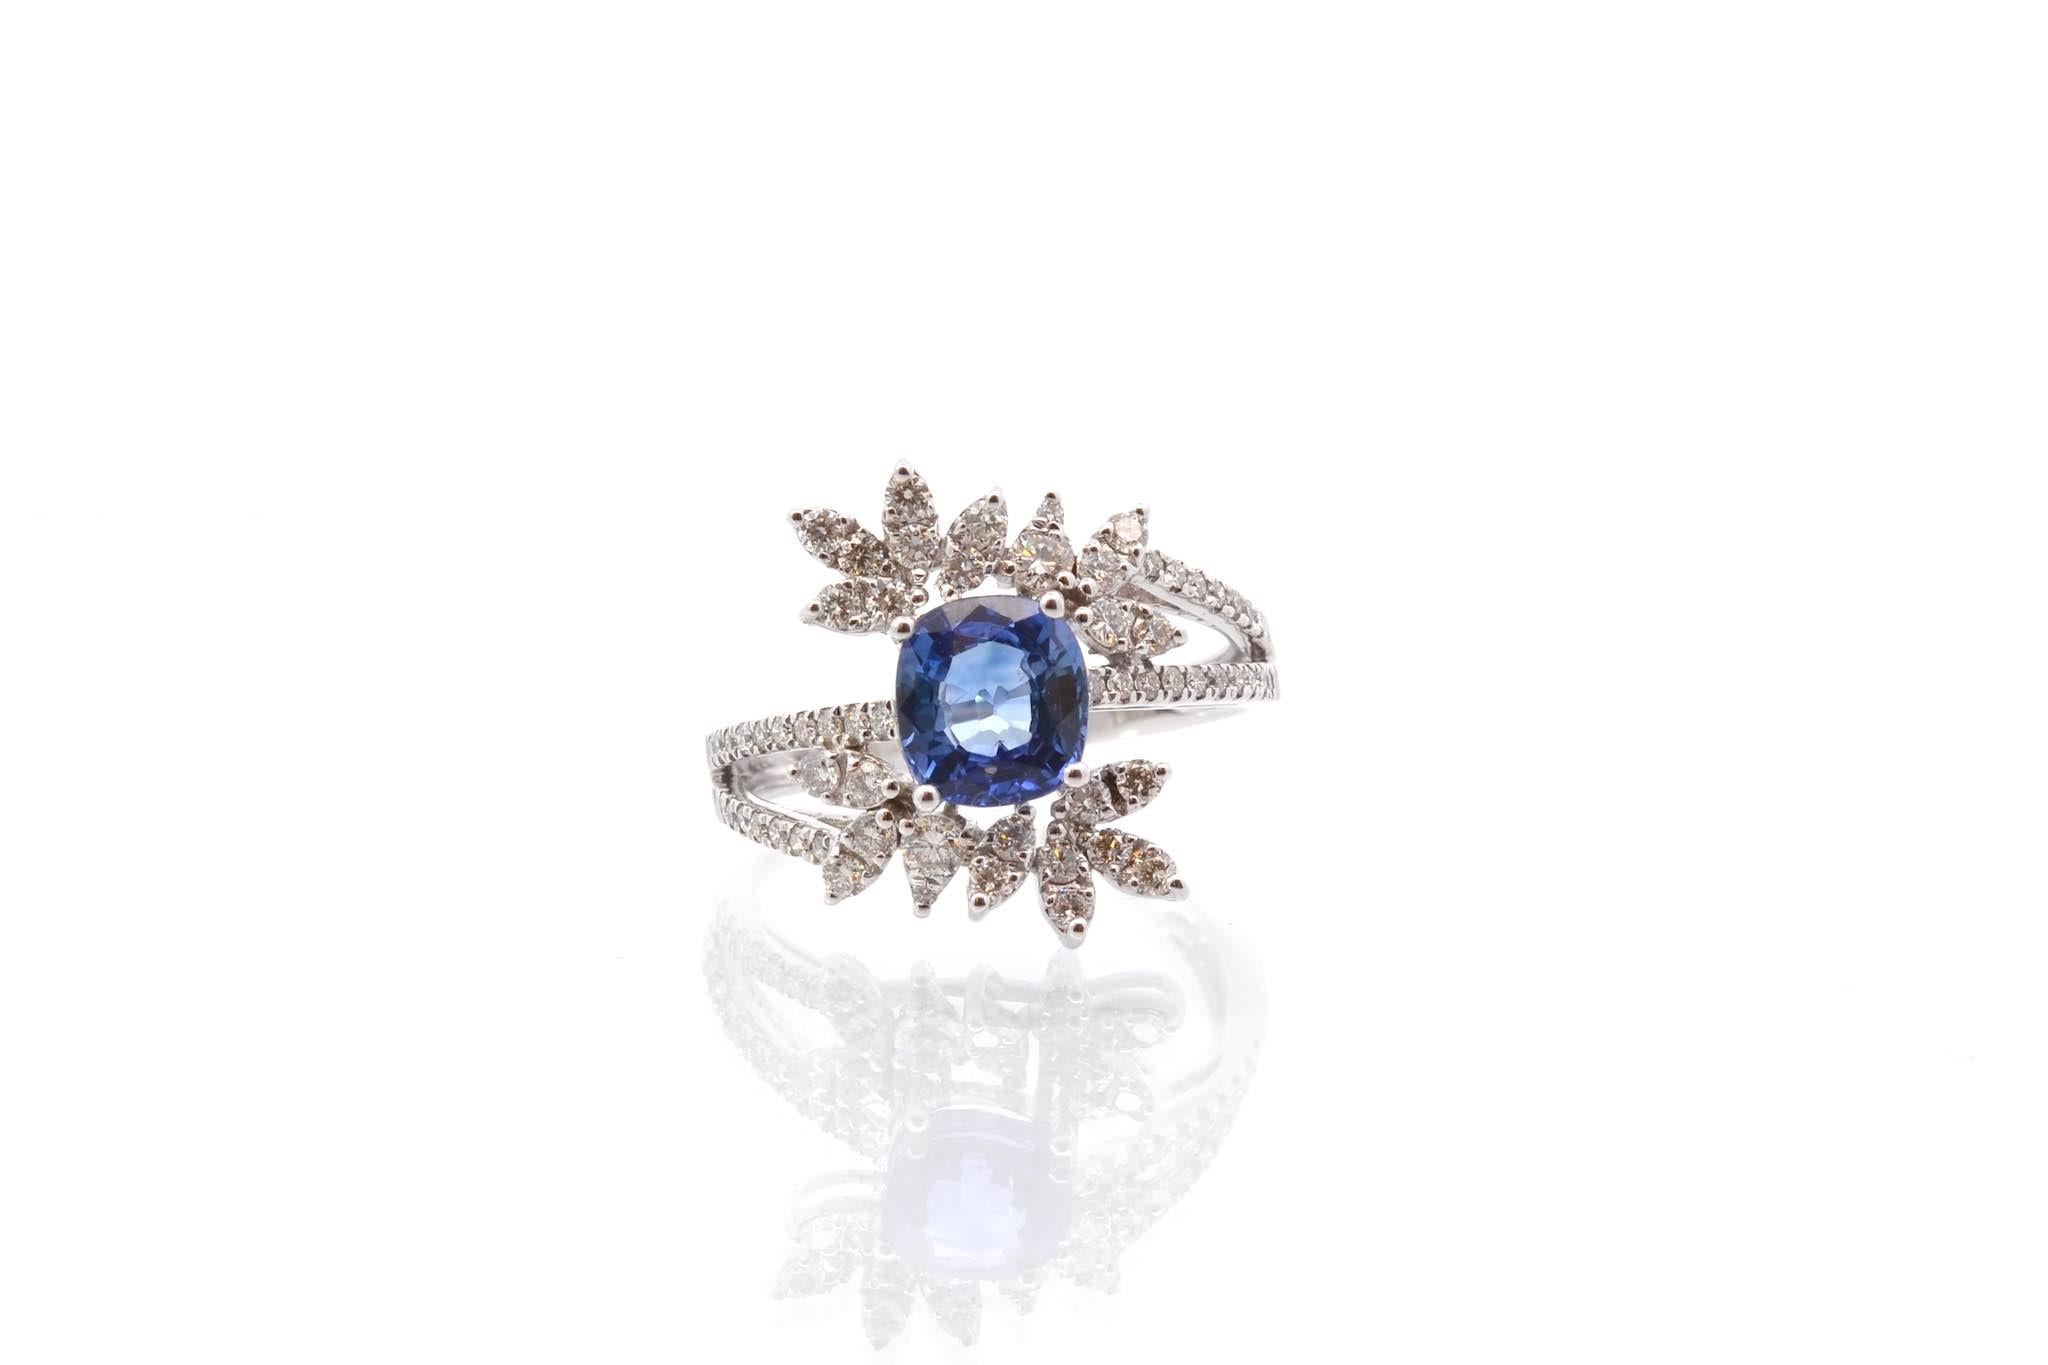 Stones: Sapphire of 1.65 cts and 62 diamonds of 0.65 ct
Material: 18k white gold
Weight: 4.2g
Period: Recent
Size: 54 (free sizing)
Certificate
Ref. : 25626